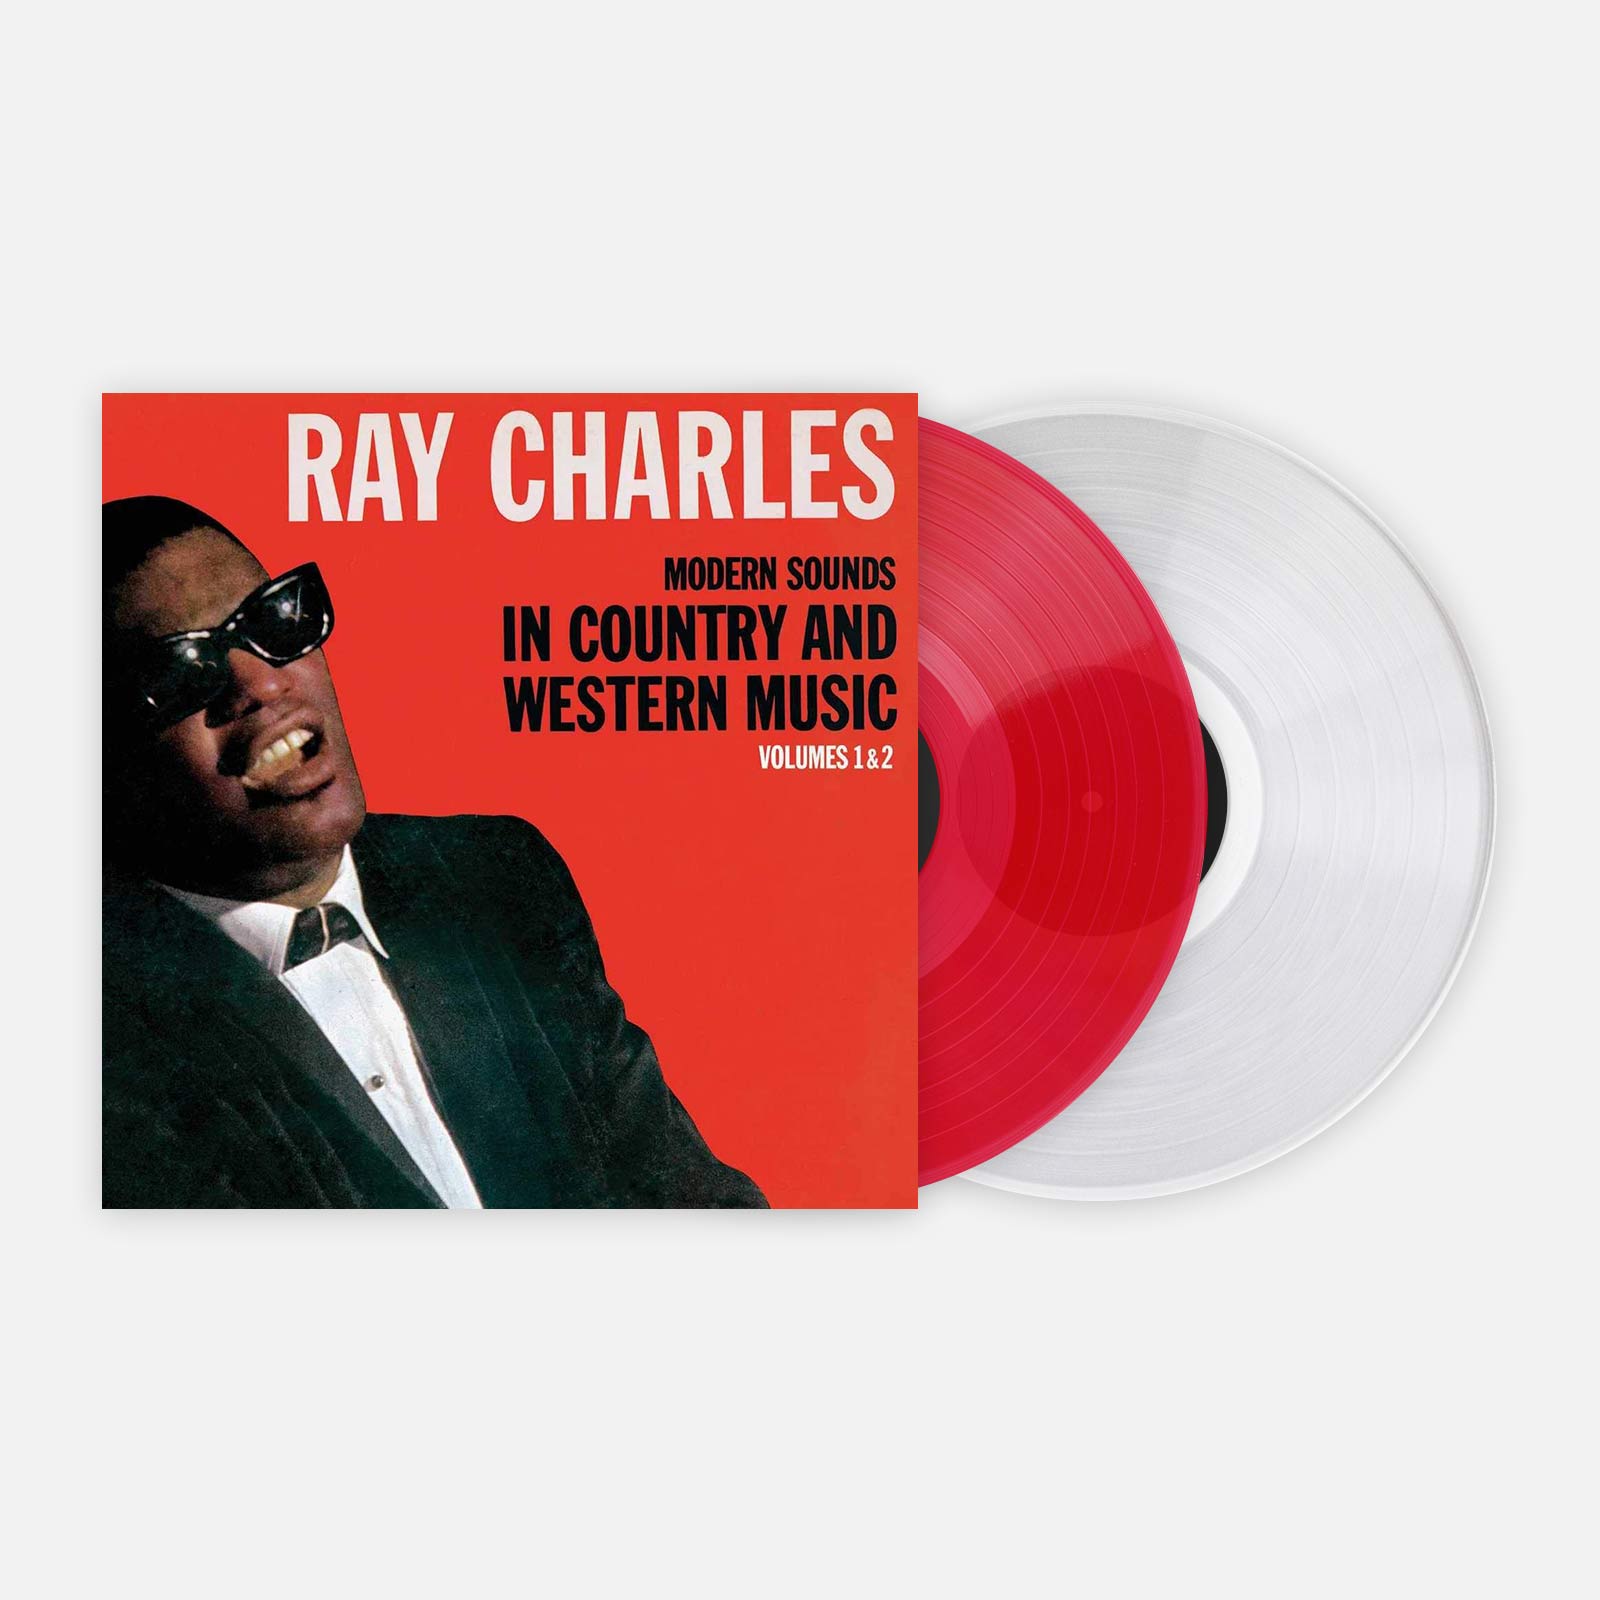 Ray Charles 'Modern Sounds in Country and Western Music, Vol. 1 & 2'